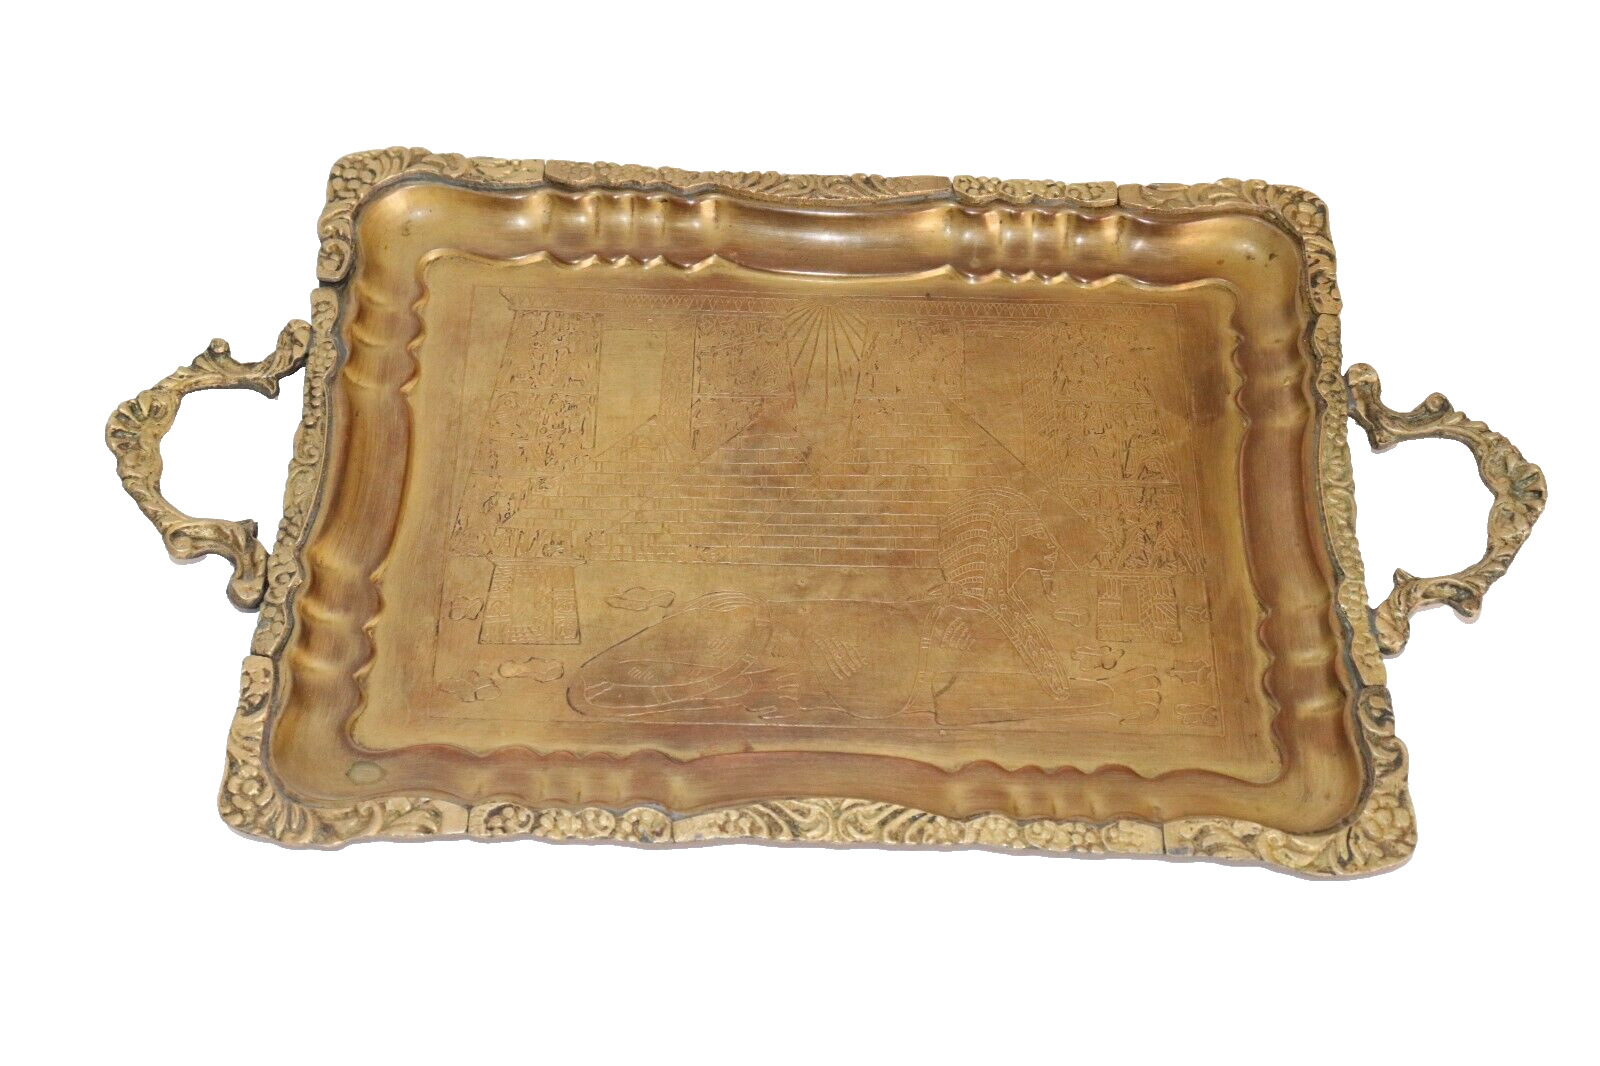 Rare Vintage Egyptian Inlaid Brass Copper Decorative Serving Tray.